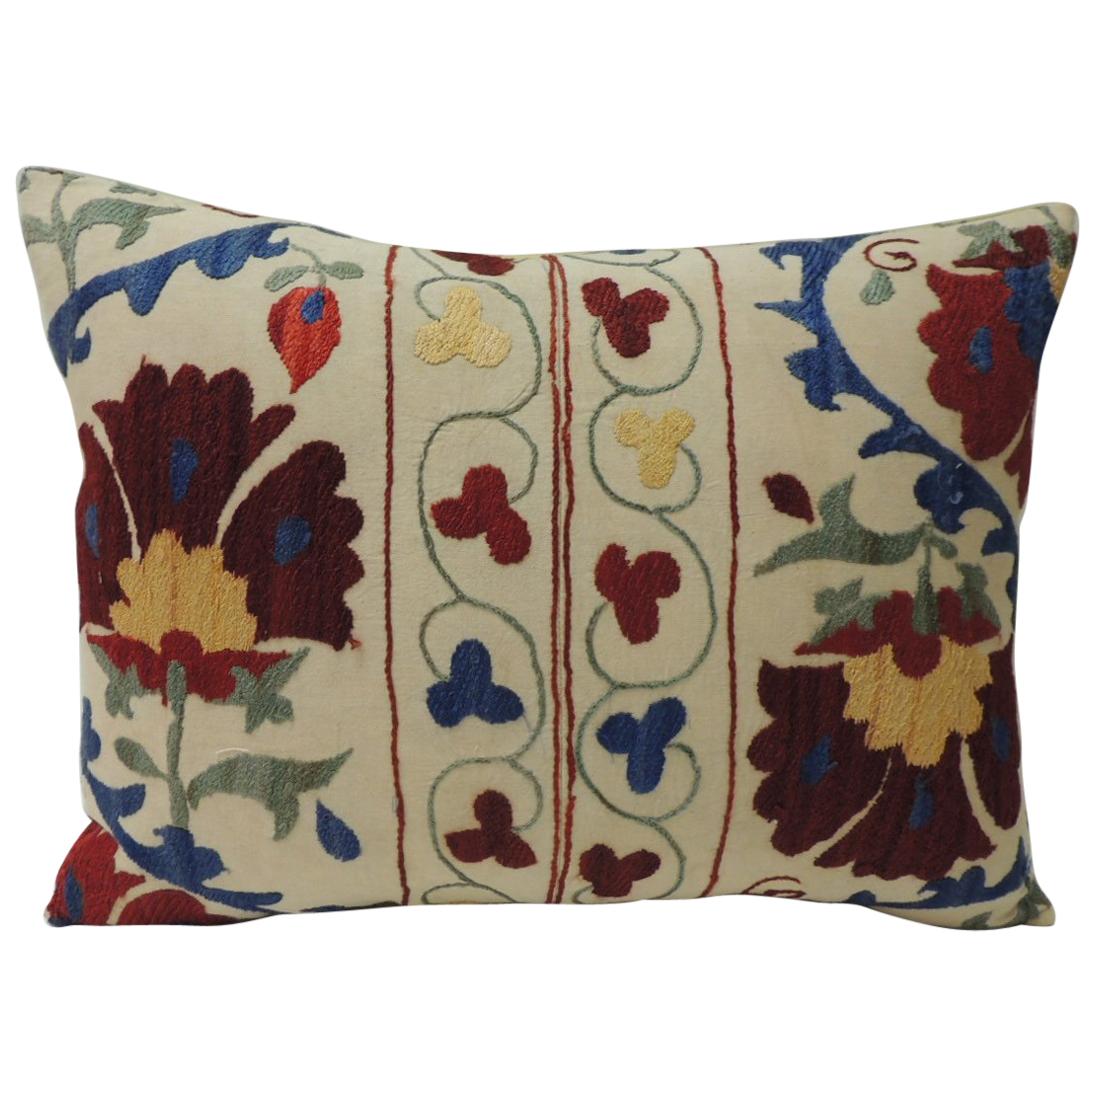 Vintage Colorful Floral Embroidery "Suzani" Decorative Bolster Pillow